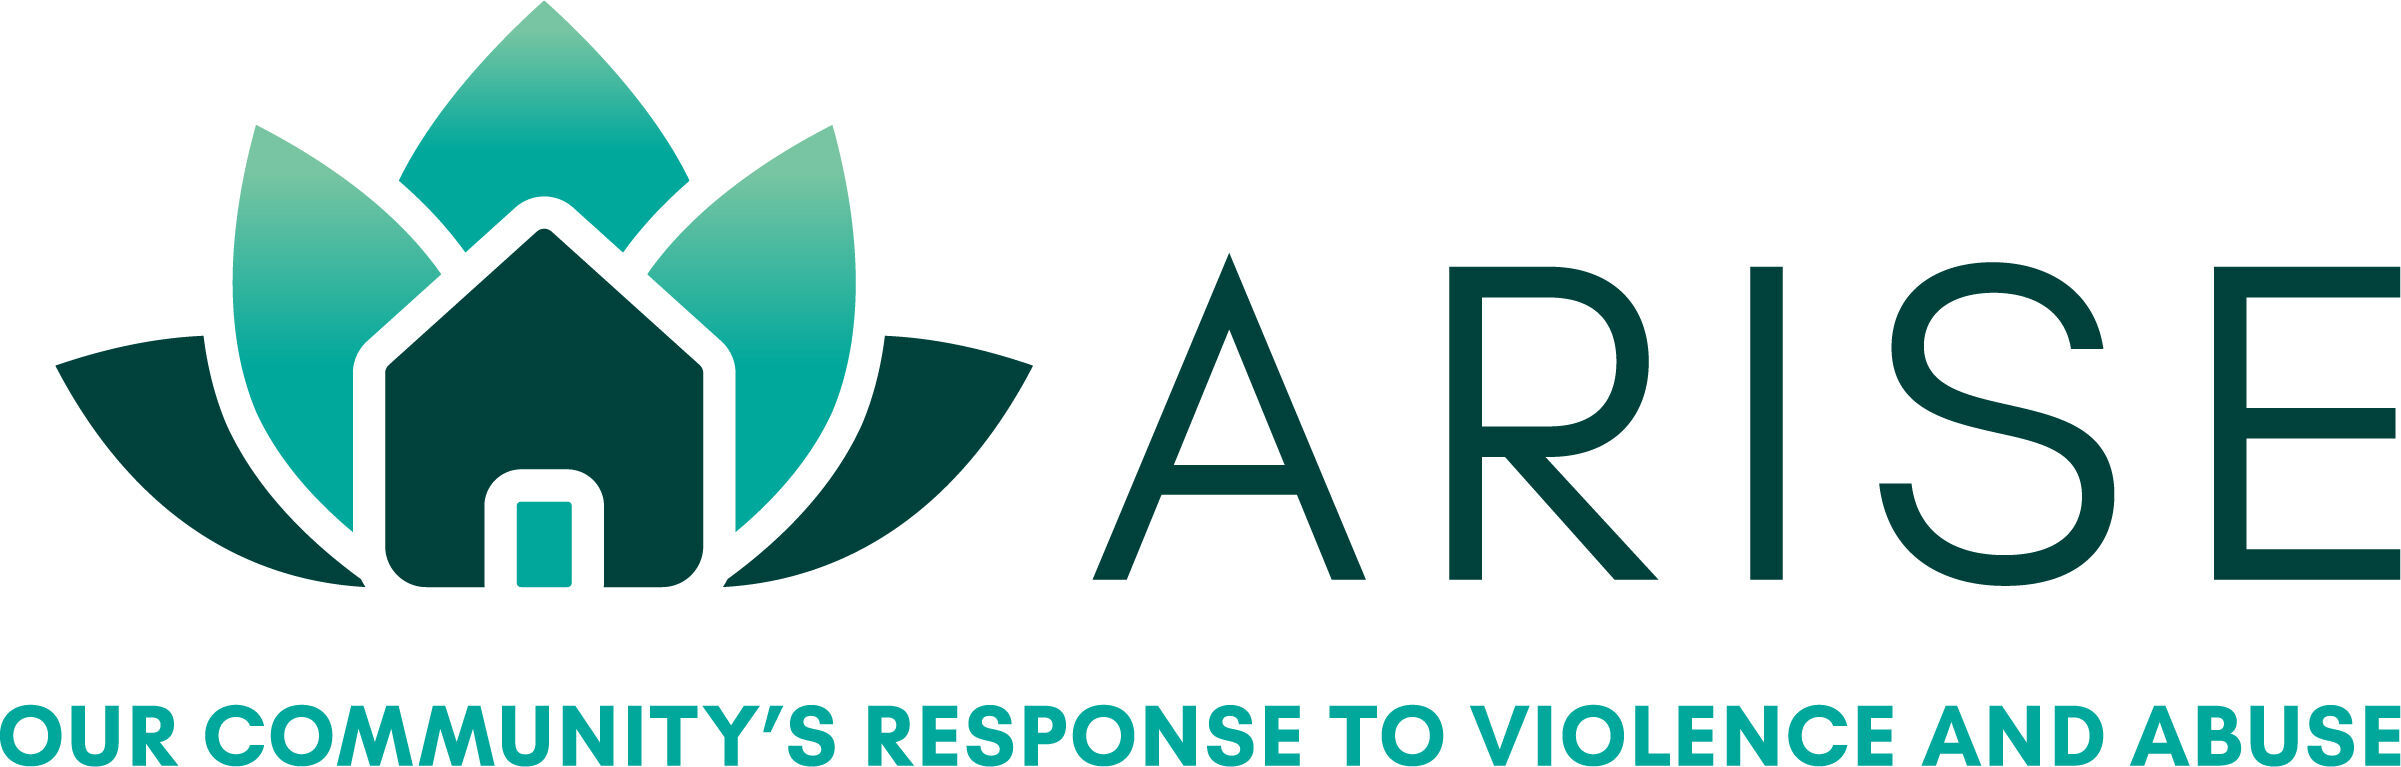 Arise sets fundraisers, requests items | Lifestyles | ncnewsonline.com